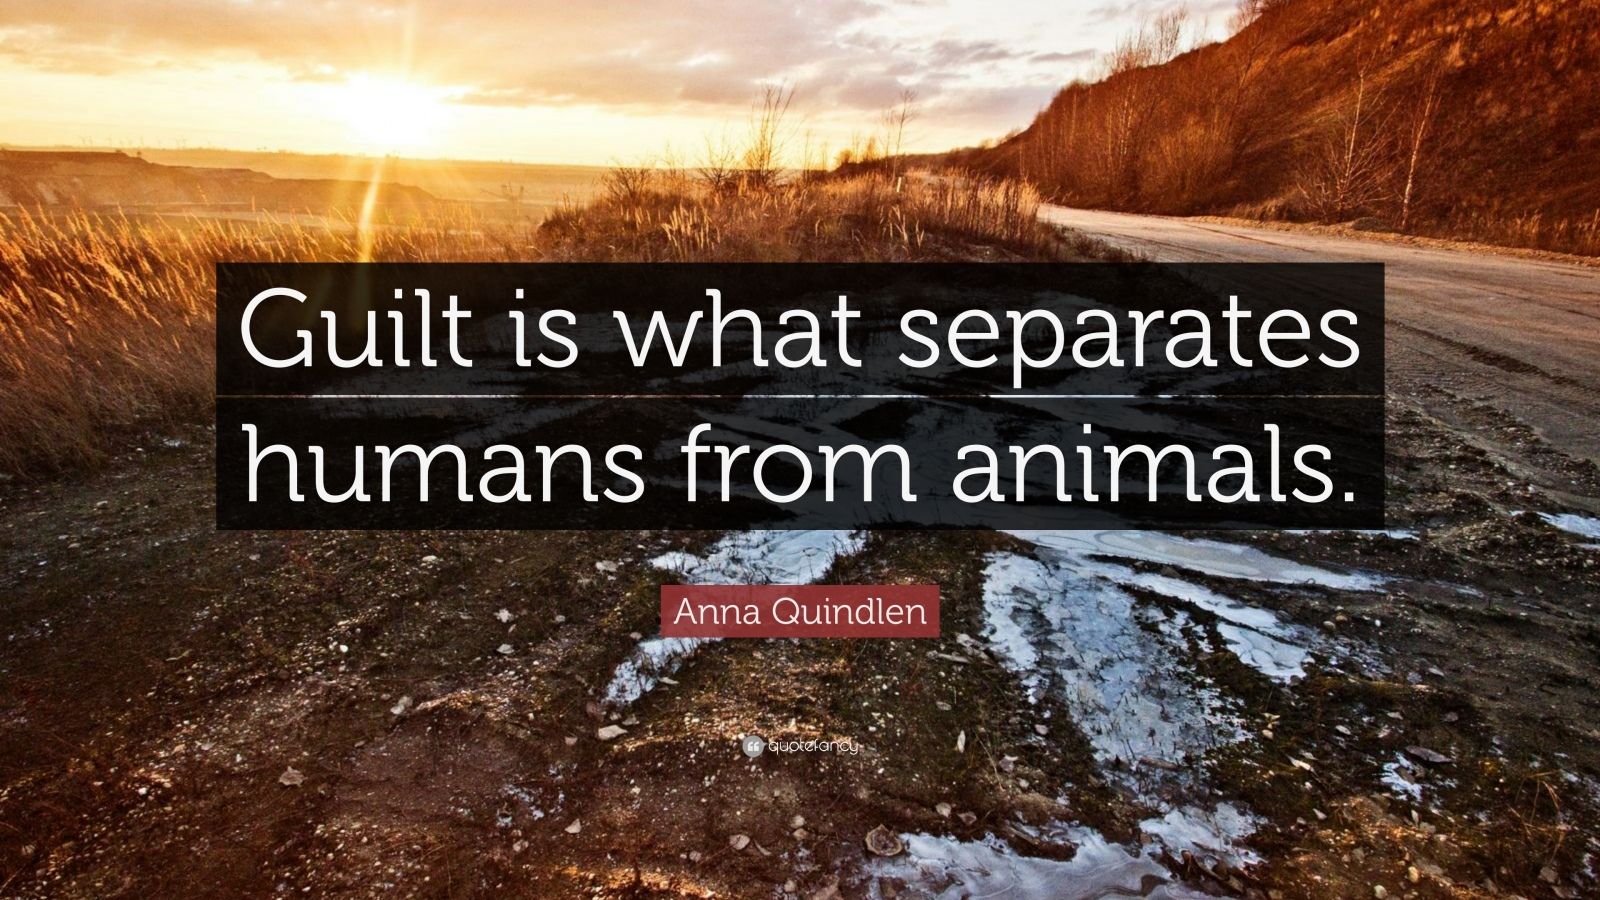 What separates humans from animals